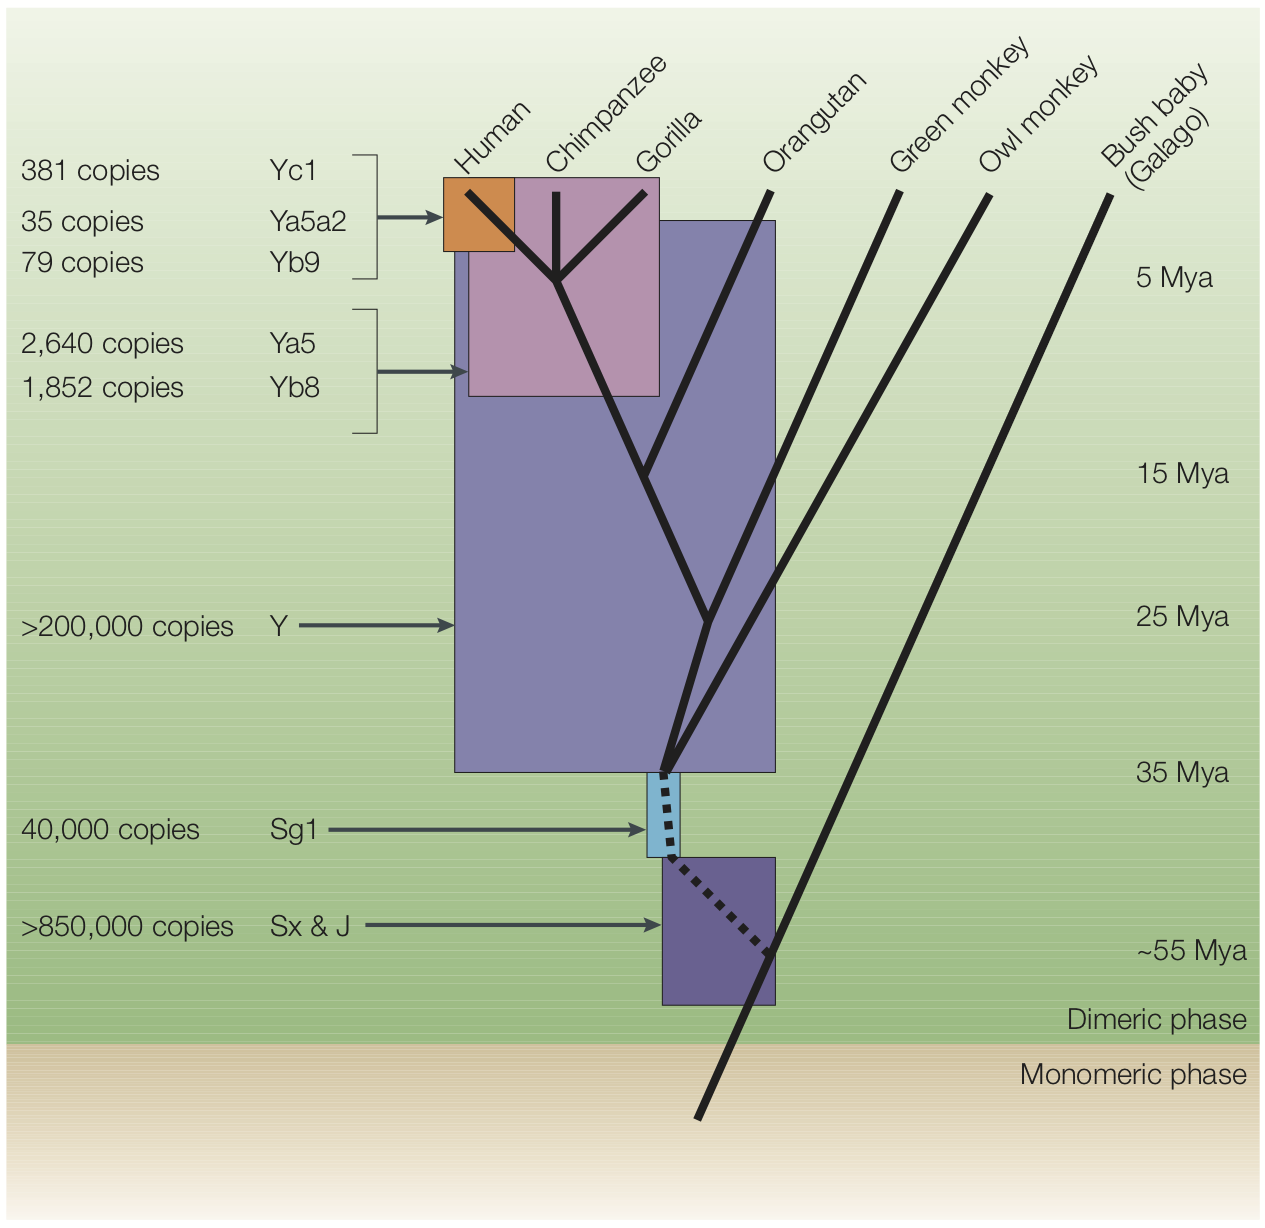 The expansion of Alu elements in primates. The expansion of Alu subfamilies (Yc1, Ya5a2, Yb9, Yb8, Y, Sg1, Sx and J) is superimposed on a tree of primate evolution. The expansion of the various Alu subfamilies is colour coded to denote the times of peak amplification. The approximate copy numbers of each Alu subfamily are also noted. Mya, million years ago. Figure and caption from [Batzer and Deininger 2002](https://doi.org/10.1038/nrg798).